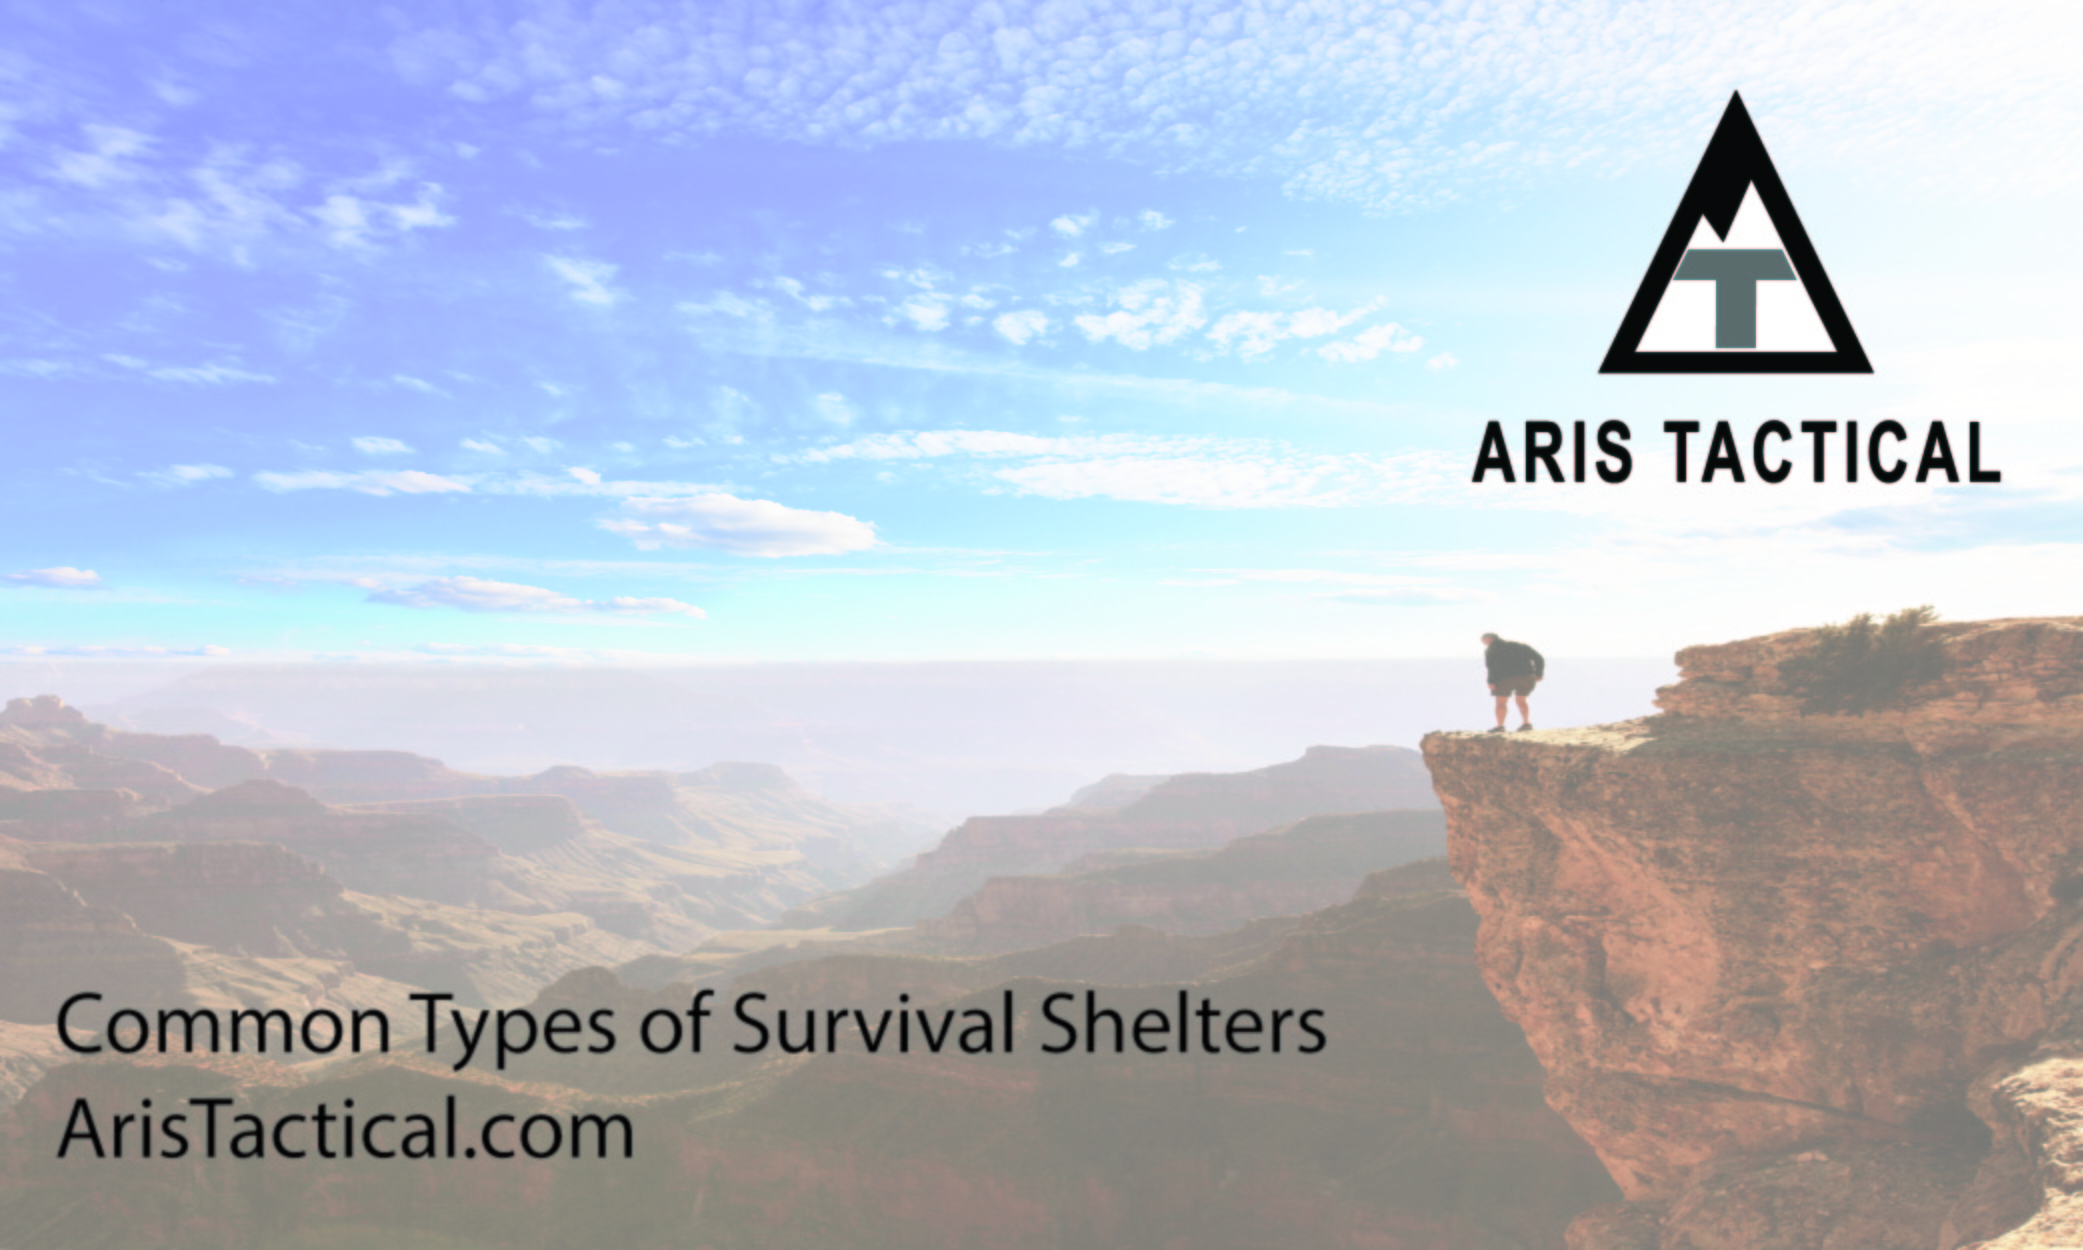 Common Types of Survival Shelters